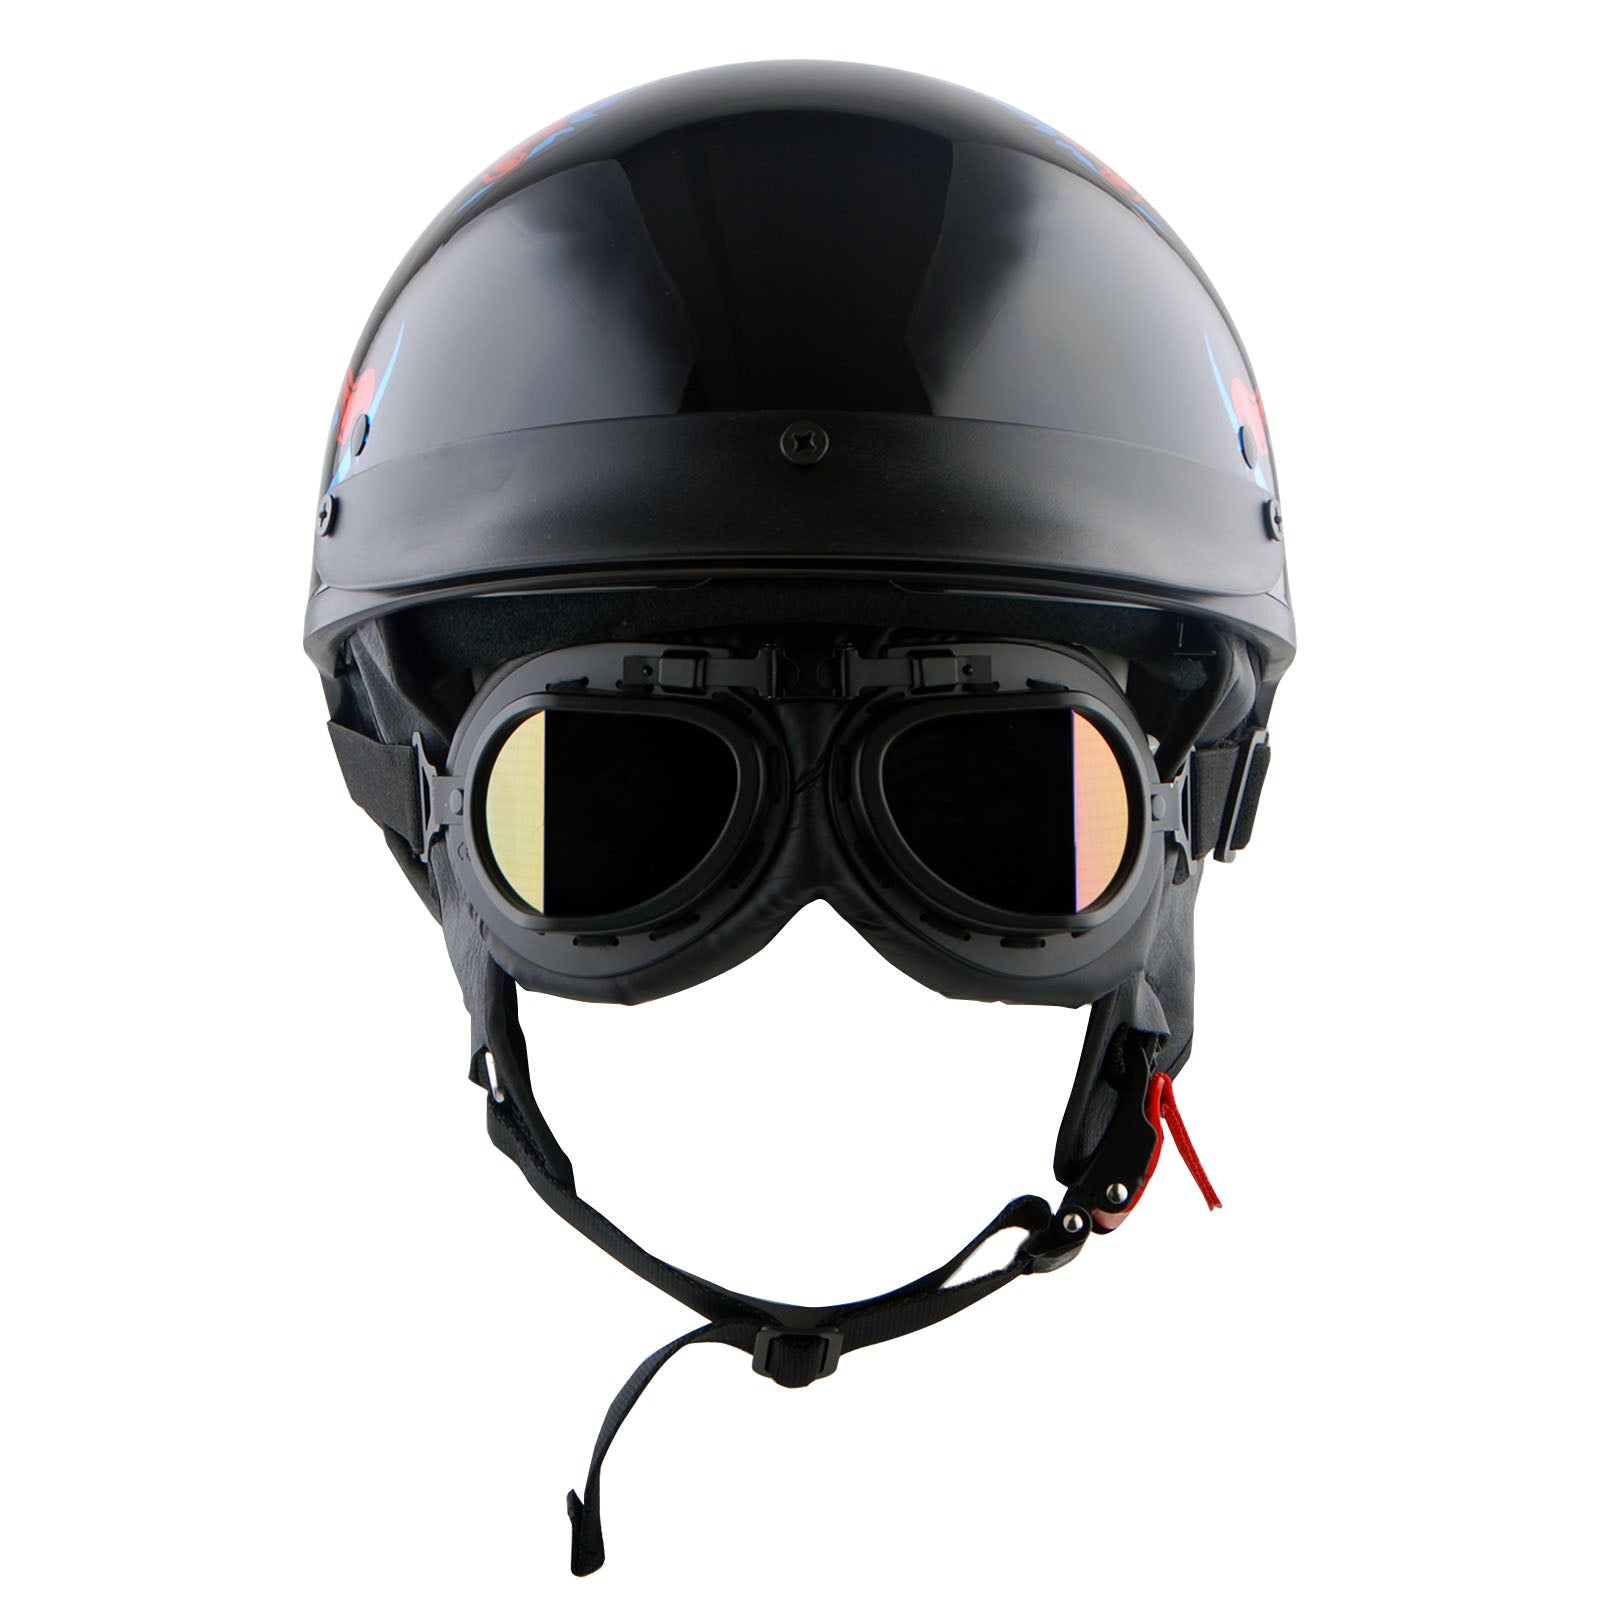 1Storm Motorcycle Half Face Helmet Mopeds Scooter Pilot with retractable Inner Smoked Visor, HKY205V + T008 Black Tinted Goggle Bundle